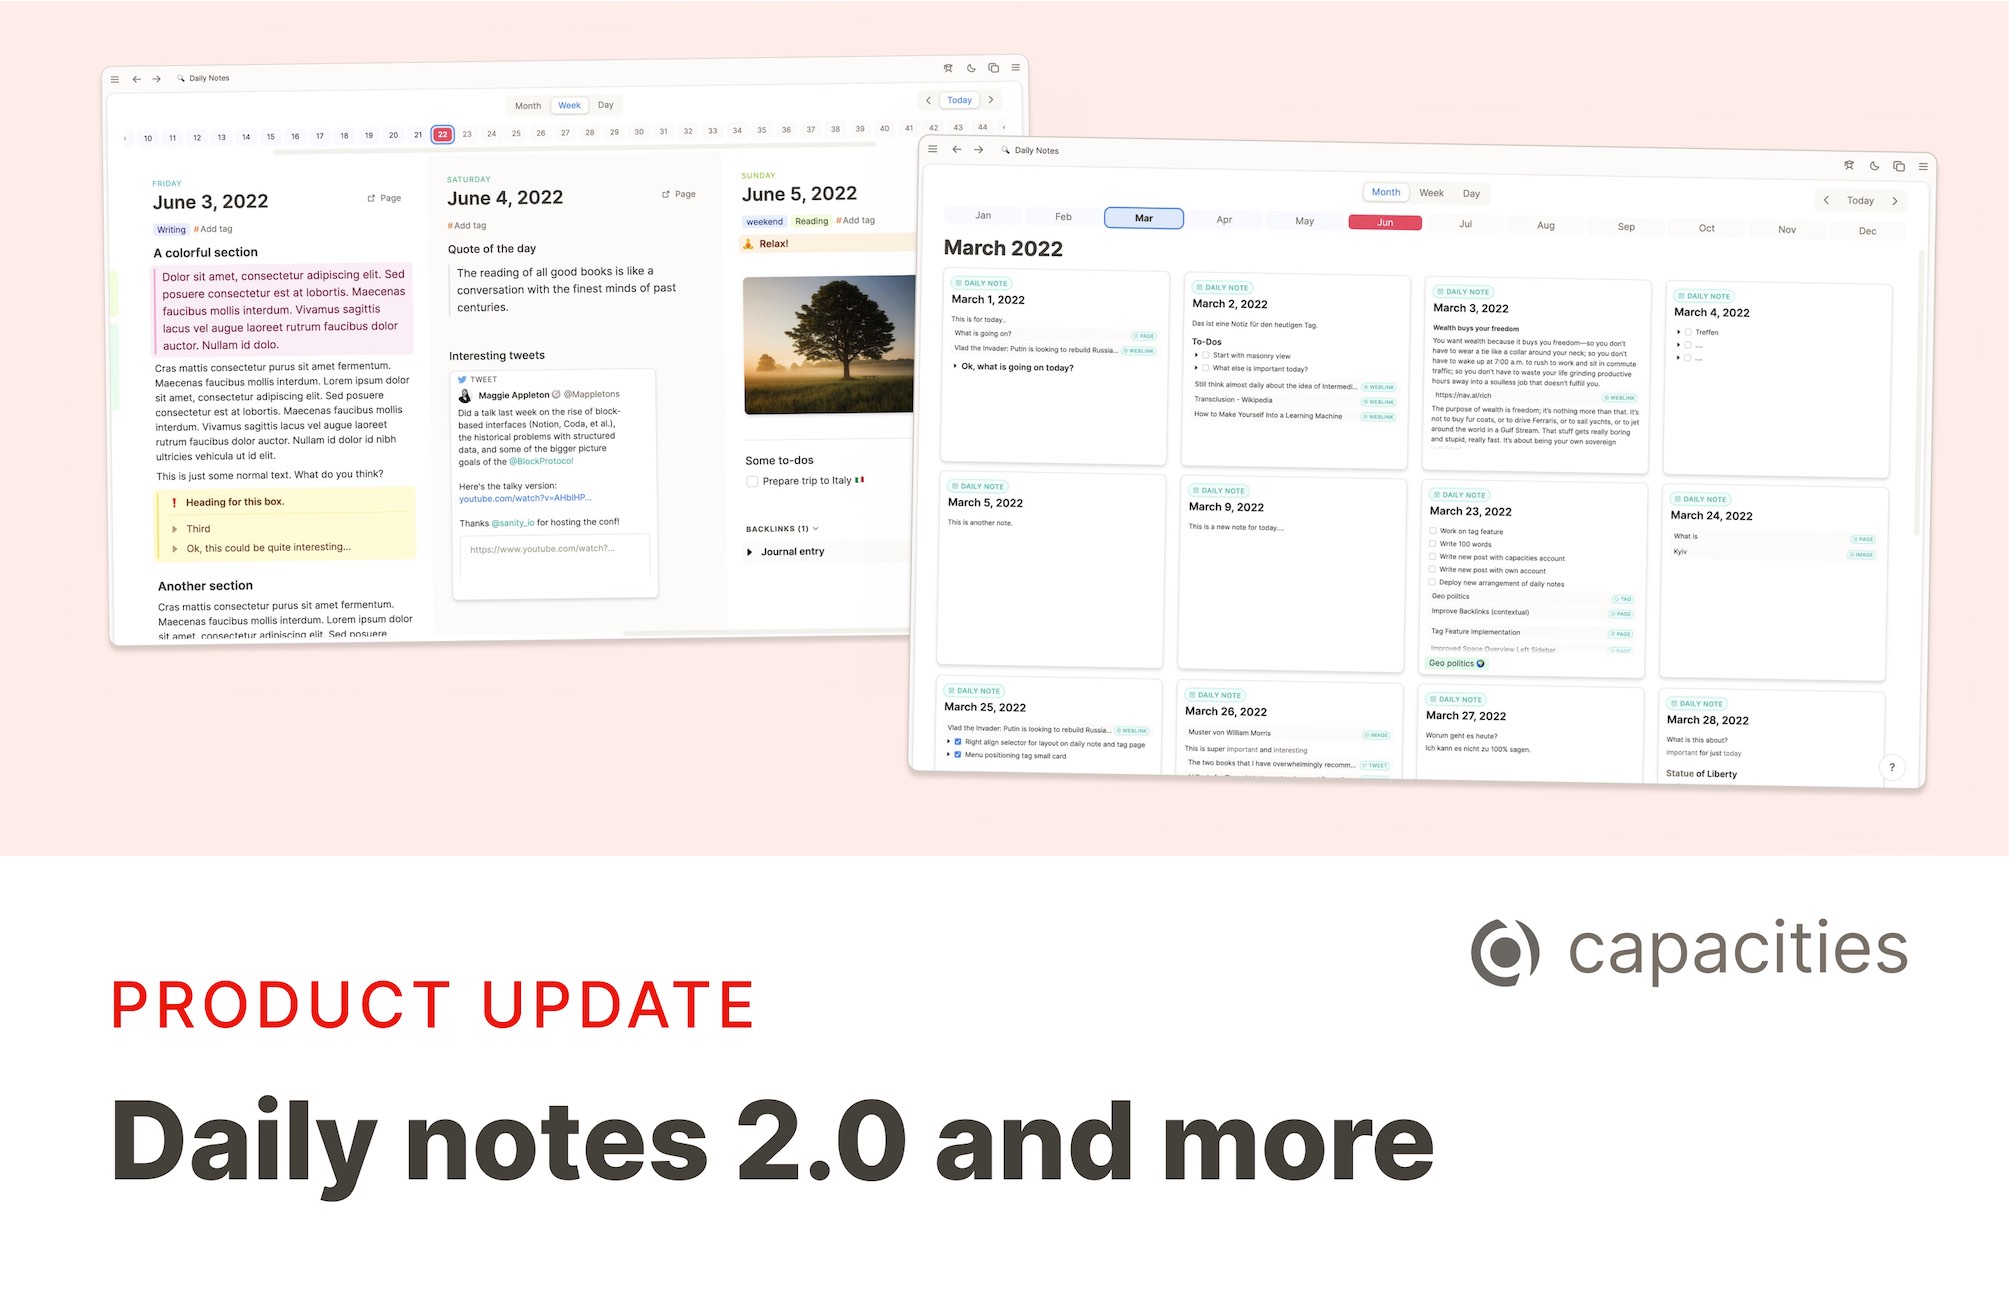 Daily notes 2.0 and more